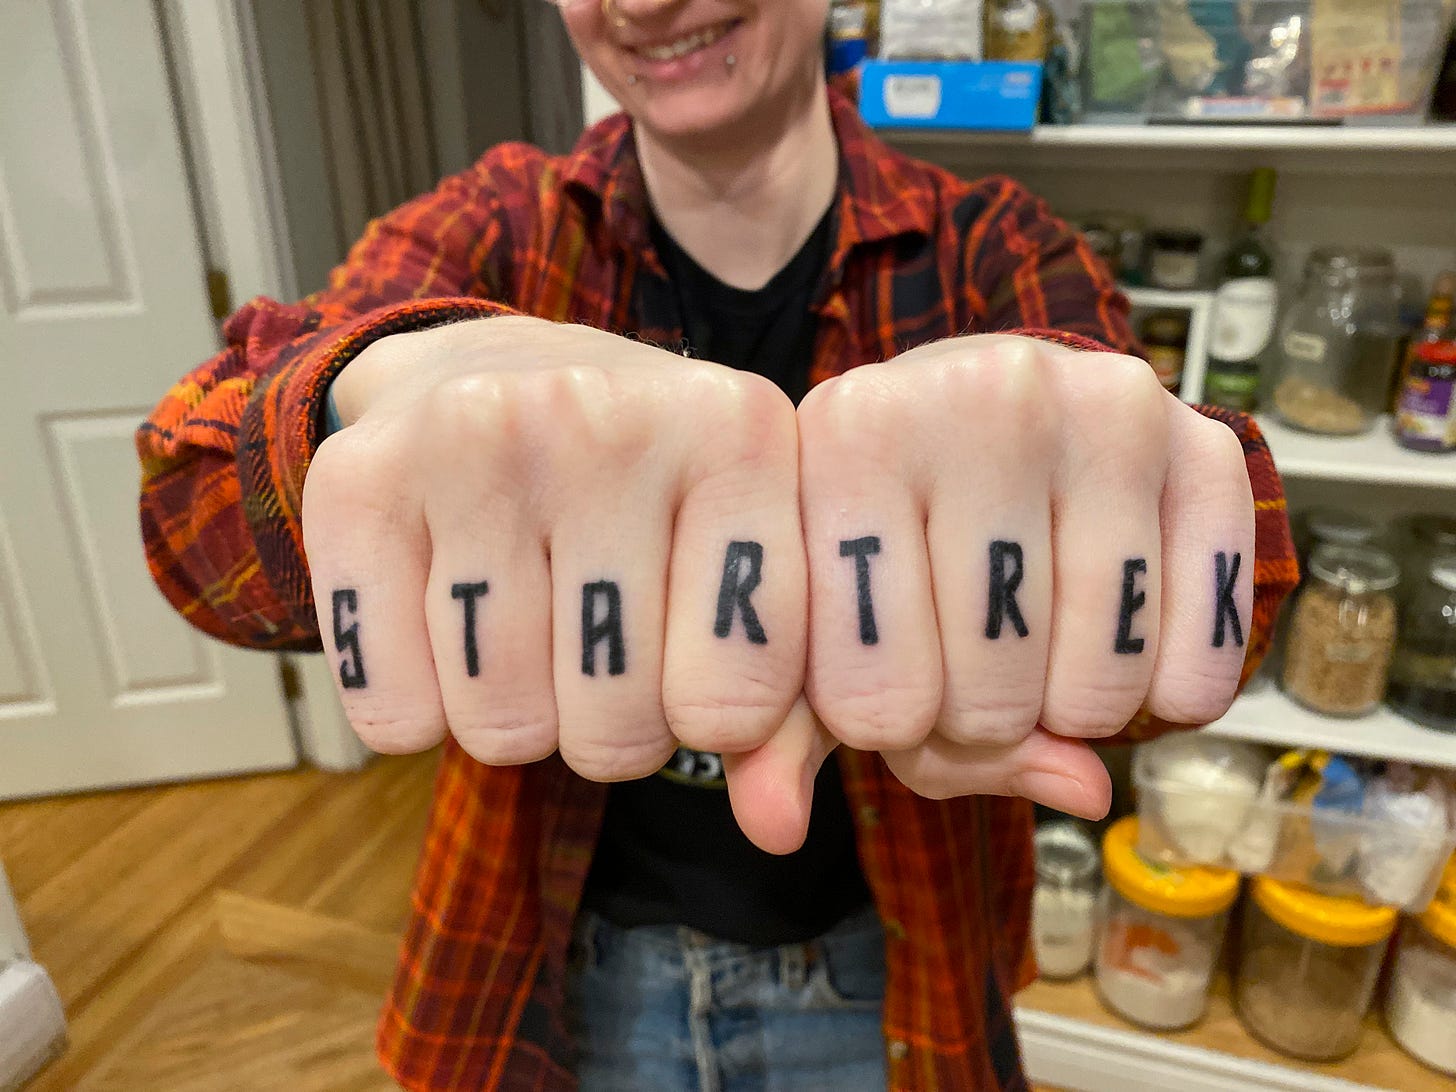 A close-up of my knuckle tattoos, which read 'STAR TREK' in black in the classic font. I am standing in front of our pantry shelves wearing a black t-shirt and an orange plaid shirt overtop. I am smiling just at the top of the frame and the rest of my face is cut off.